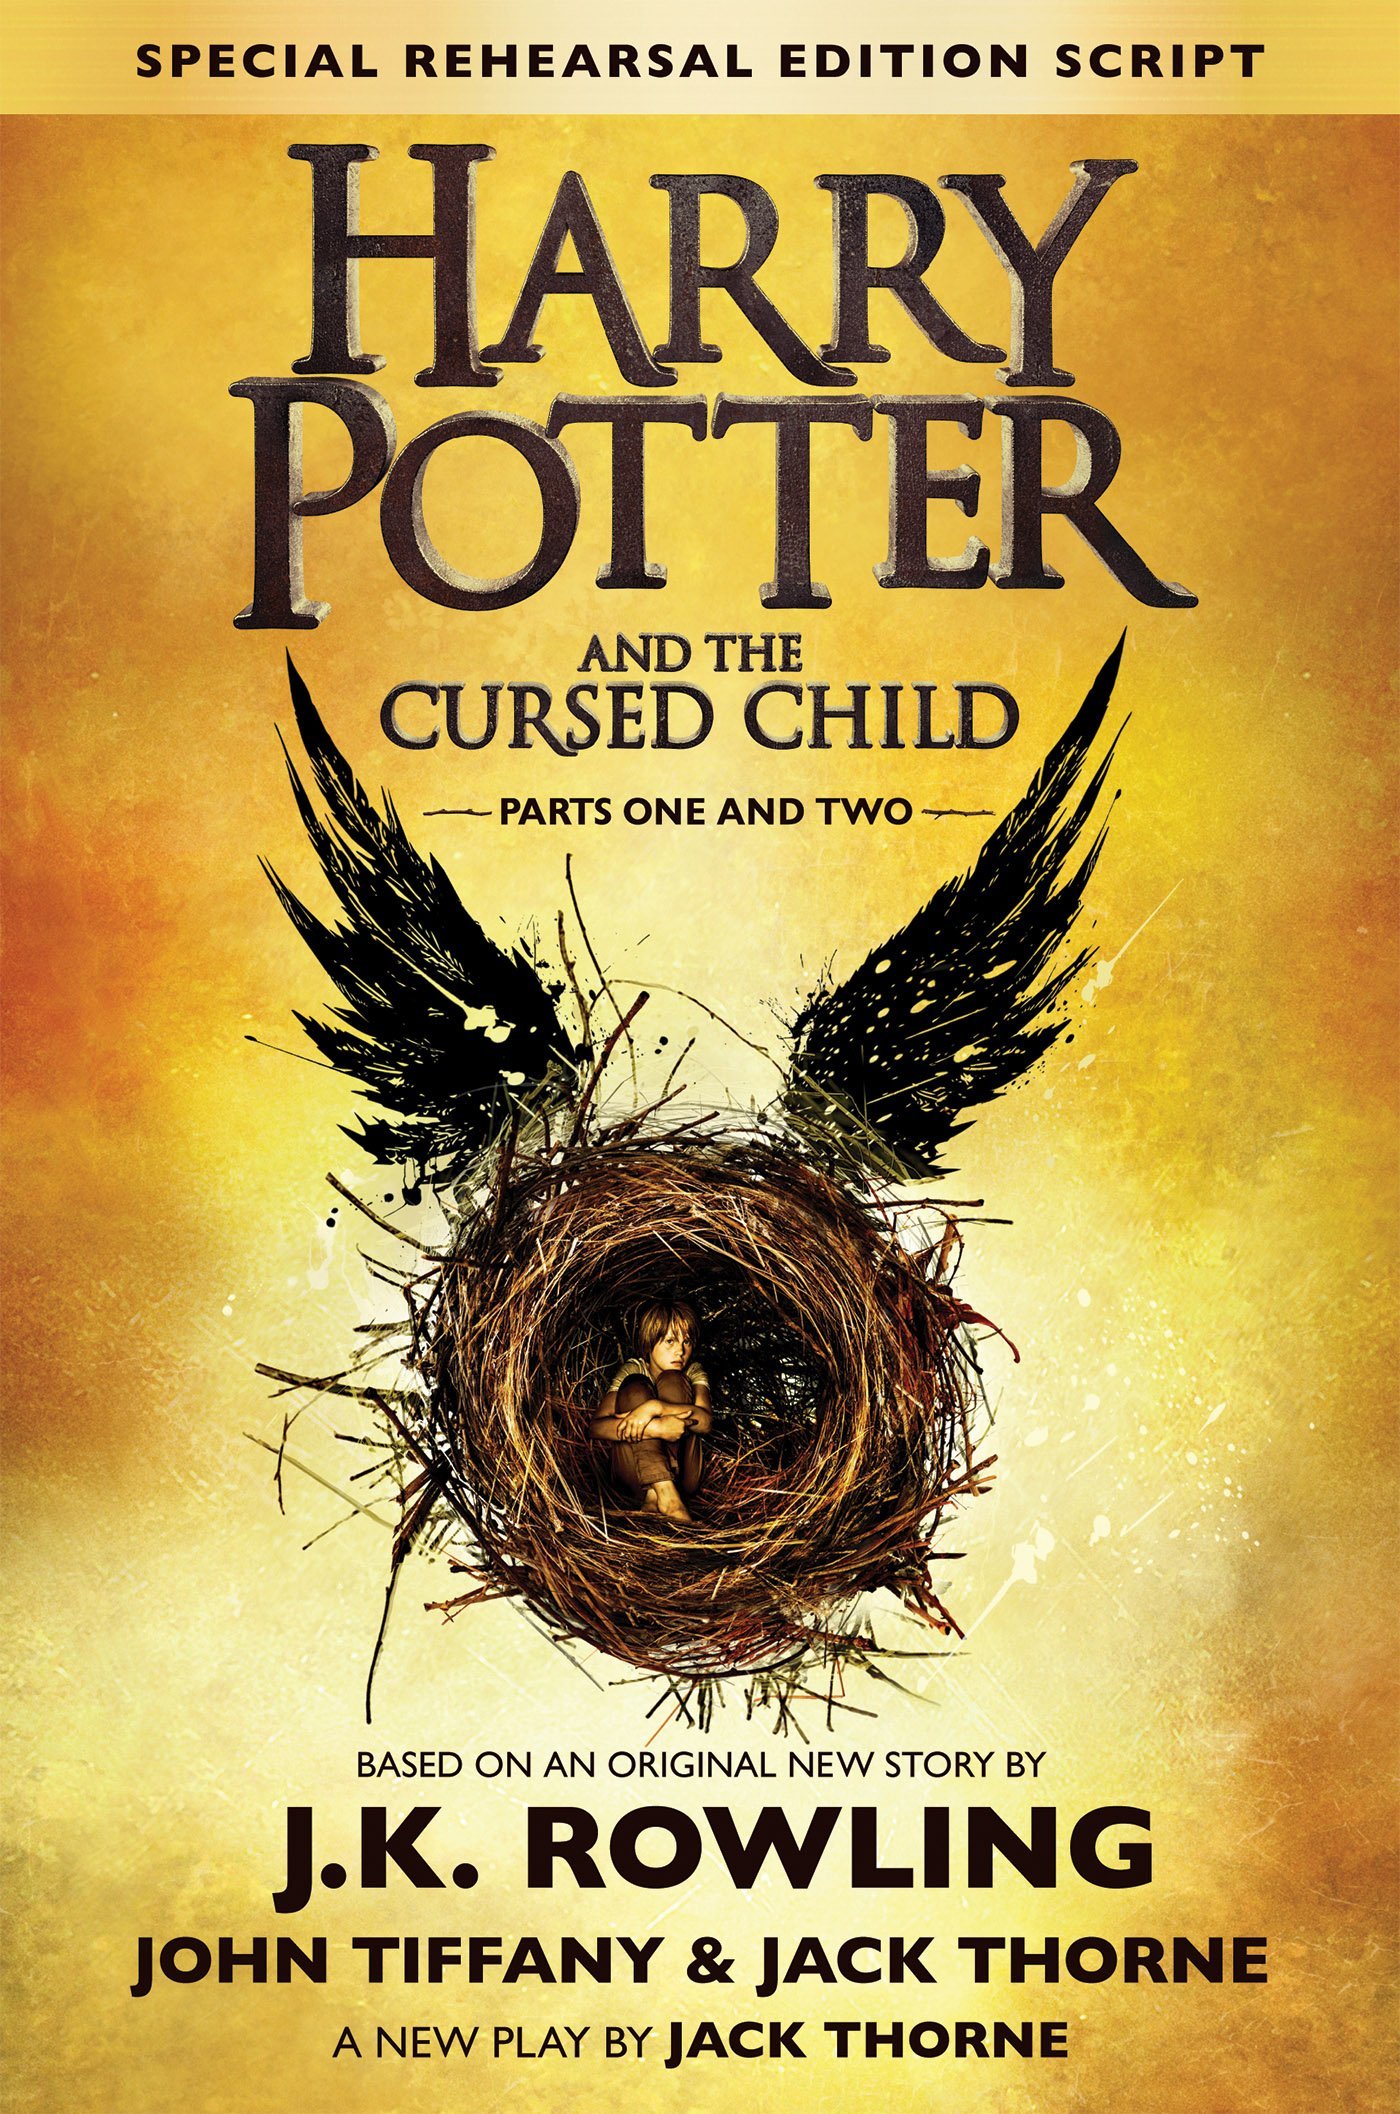 HP and the Cursed Child